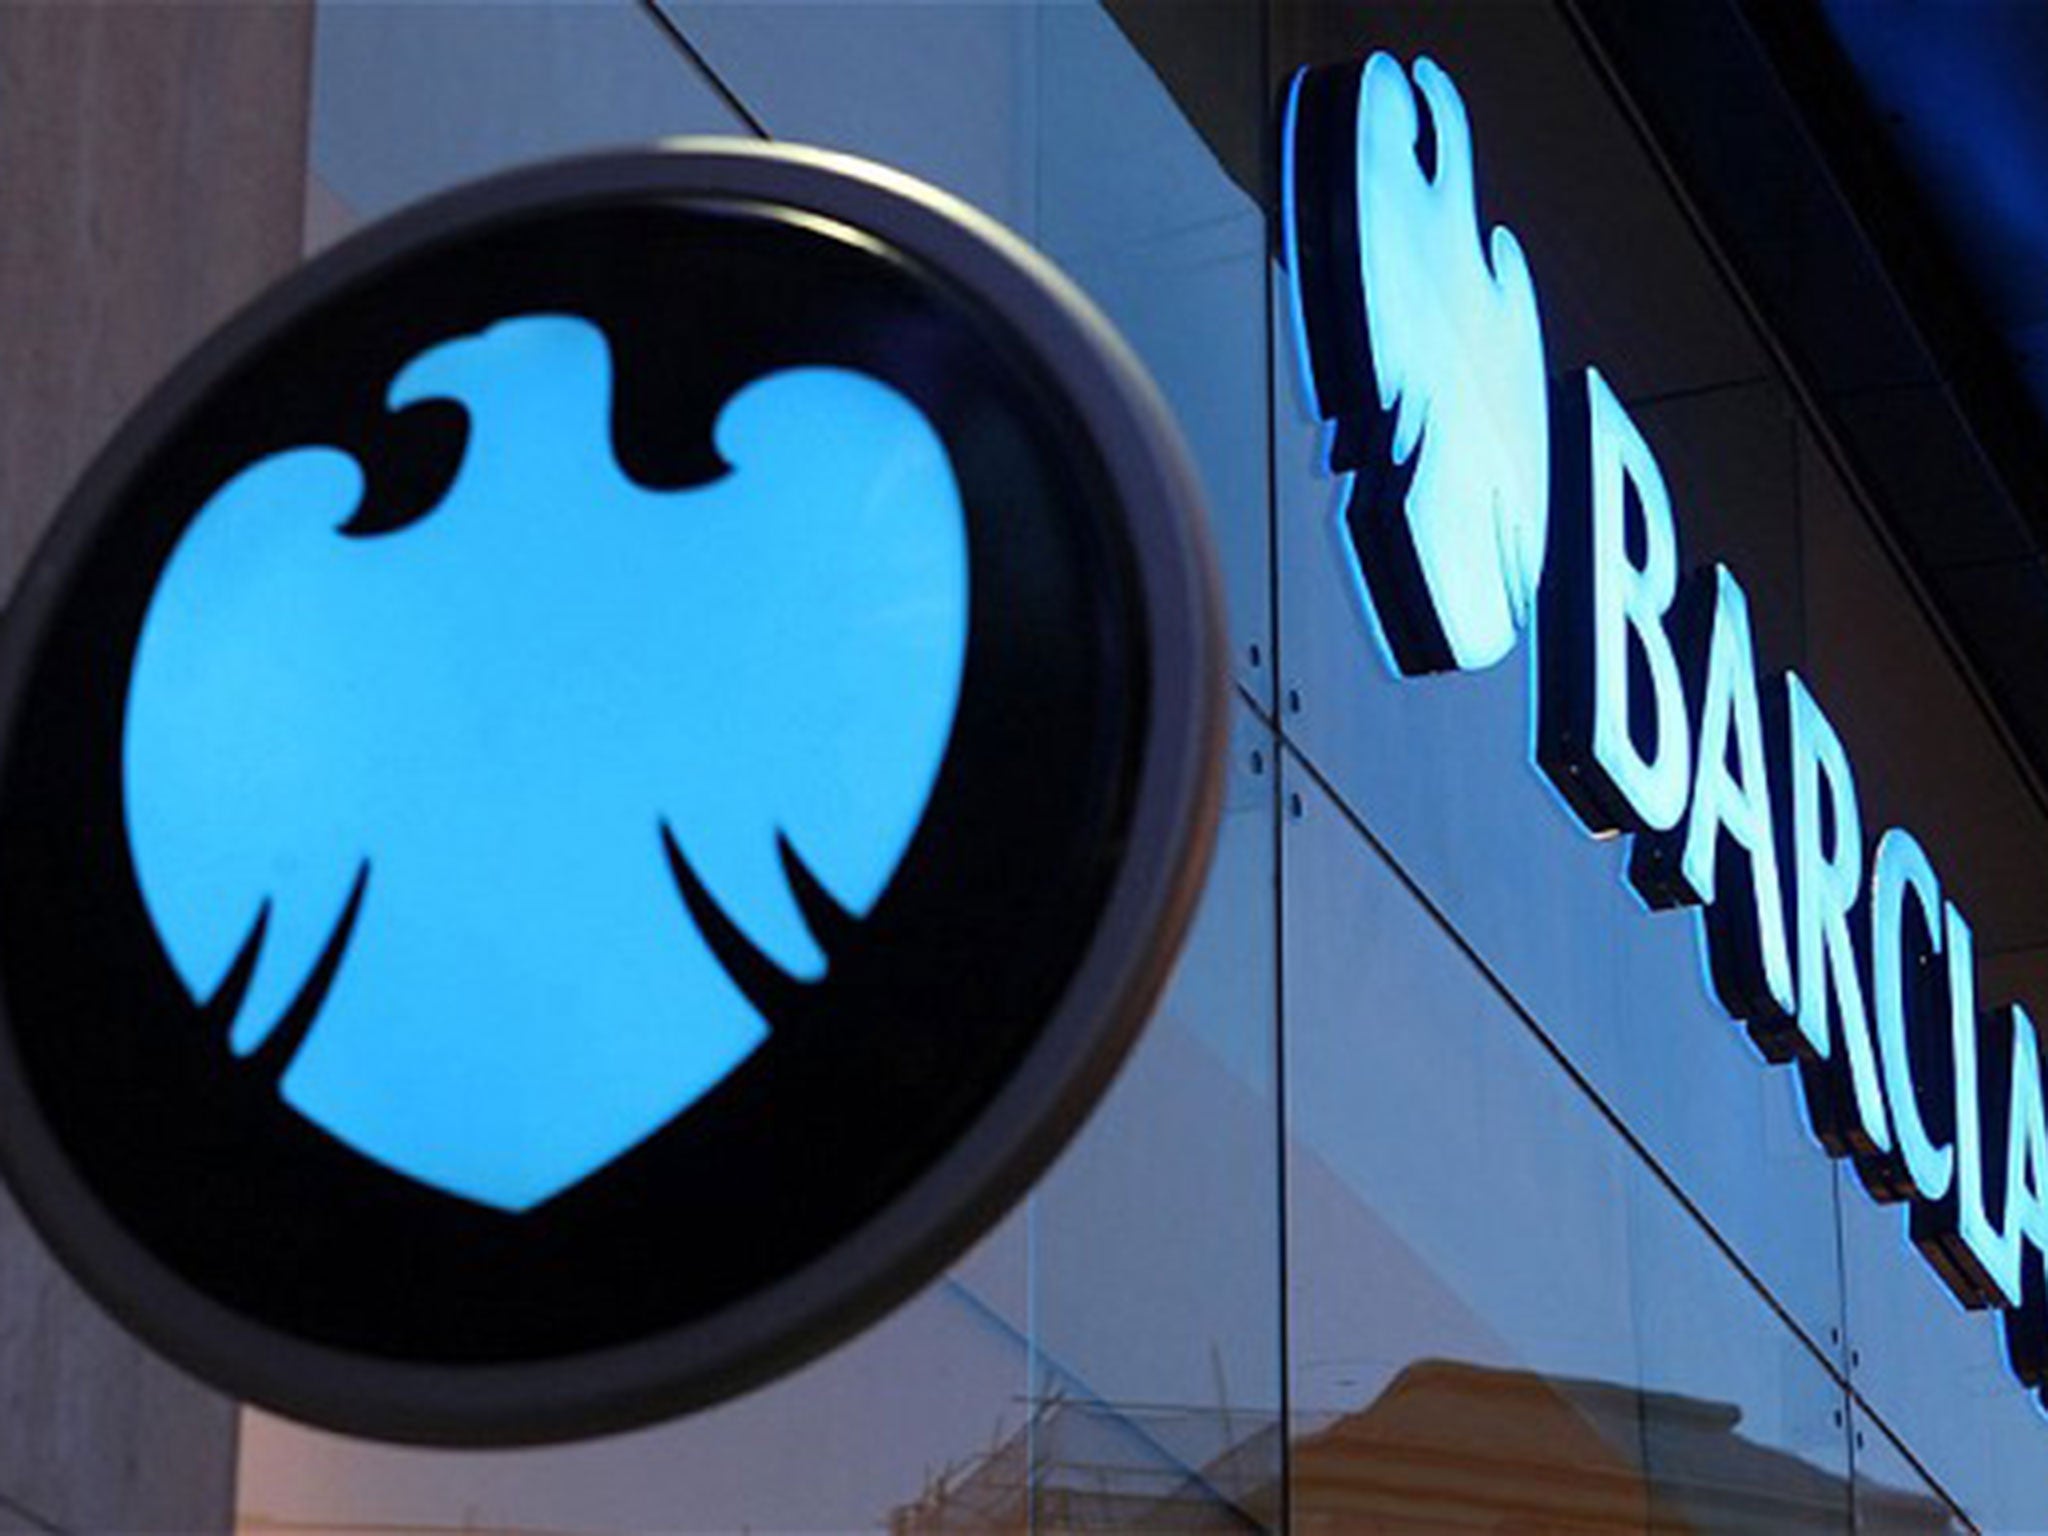 Barclays will be hit with a £38m fine for failing to ensure adequate protection of clients’ funds